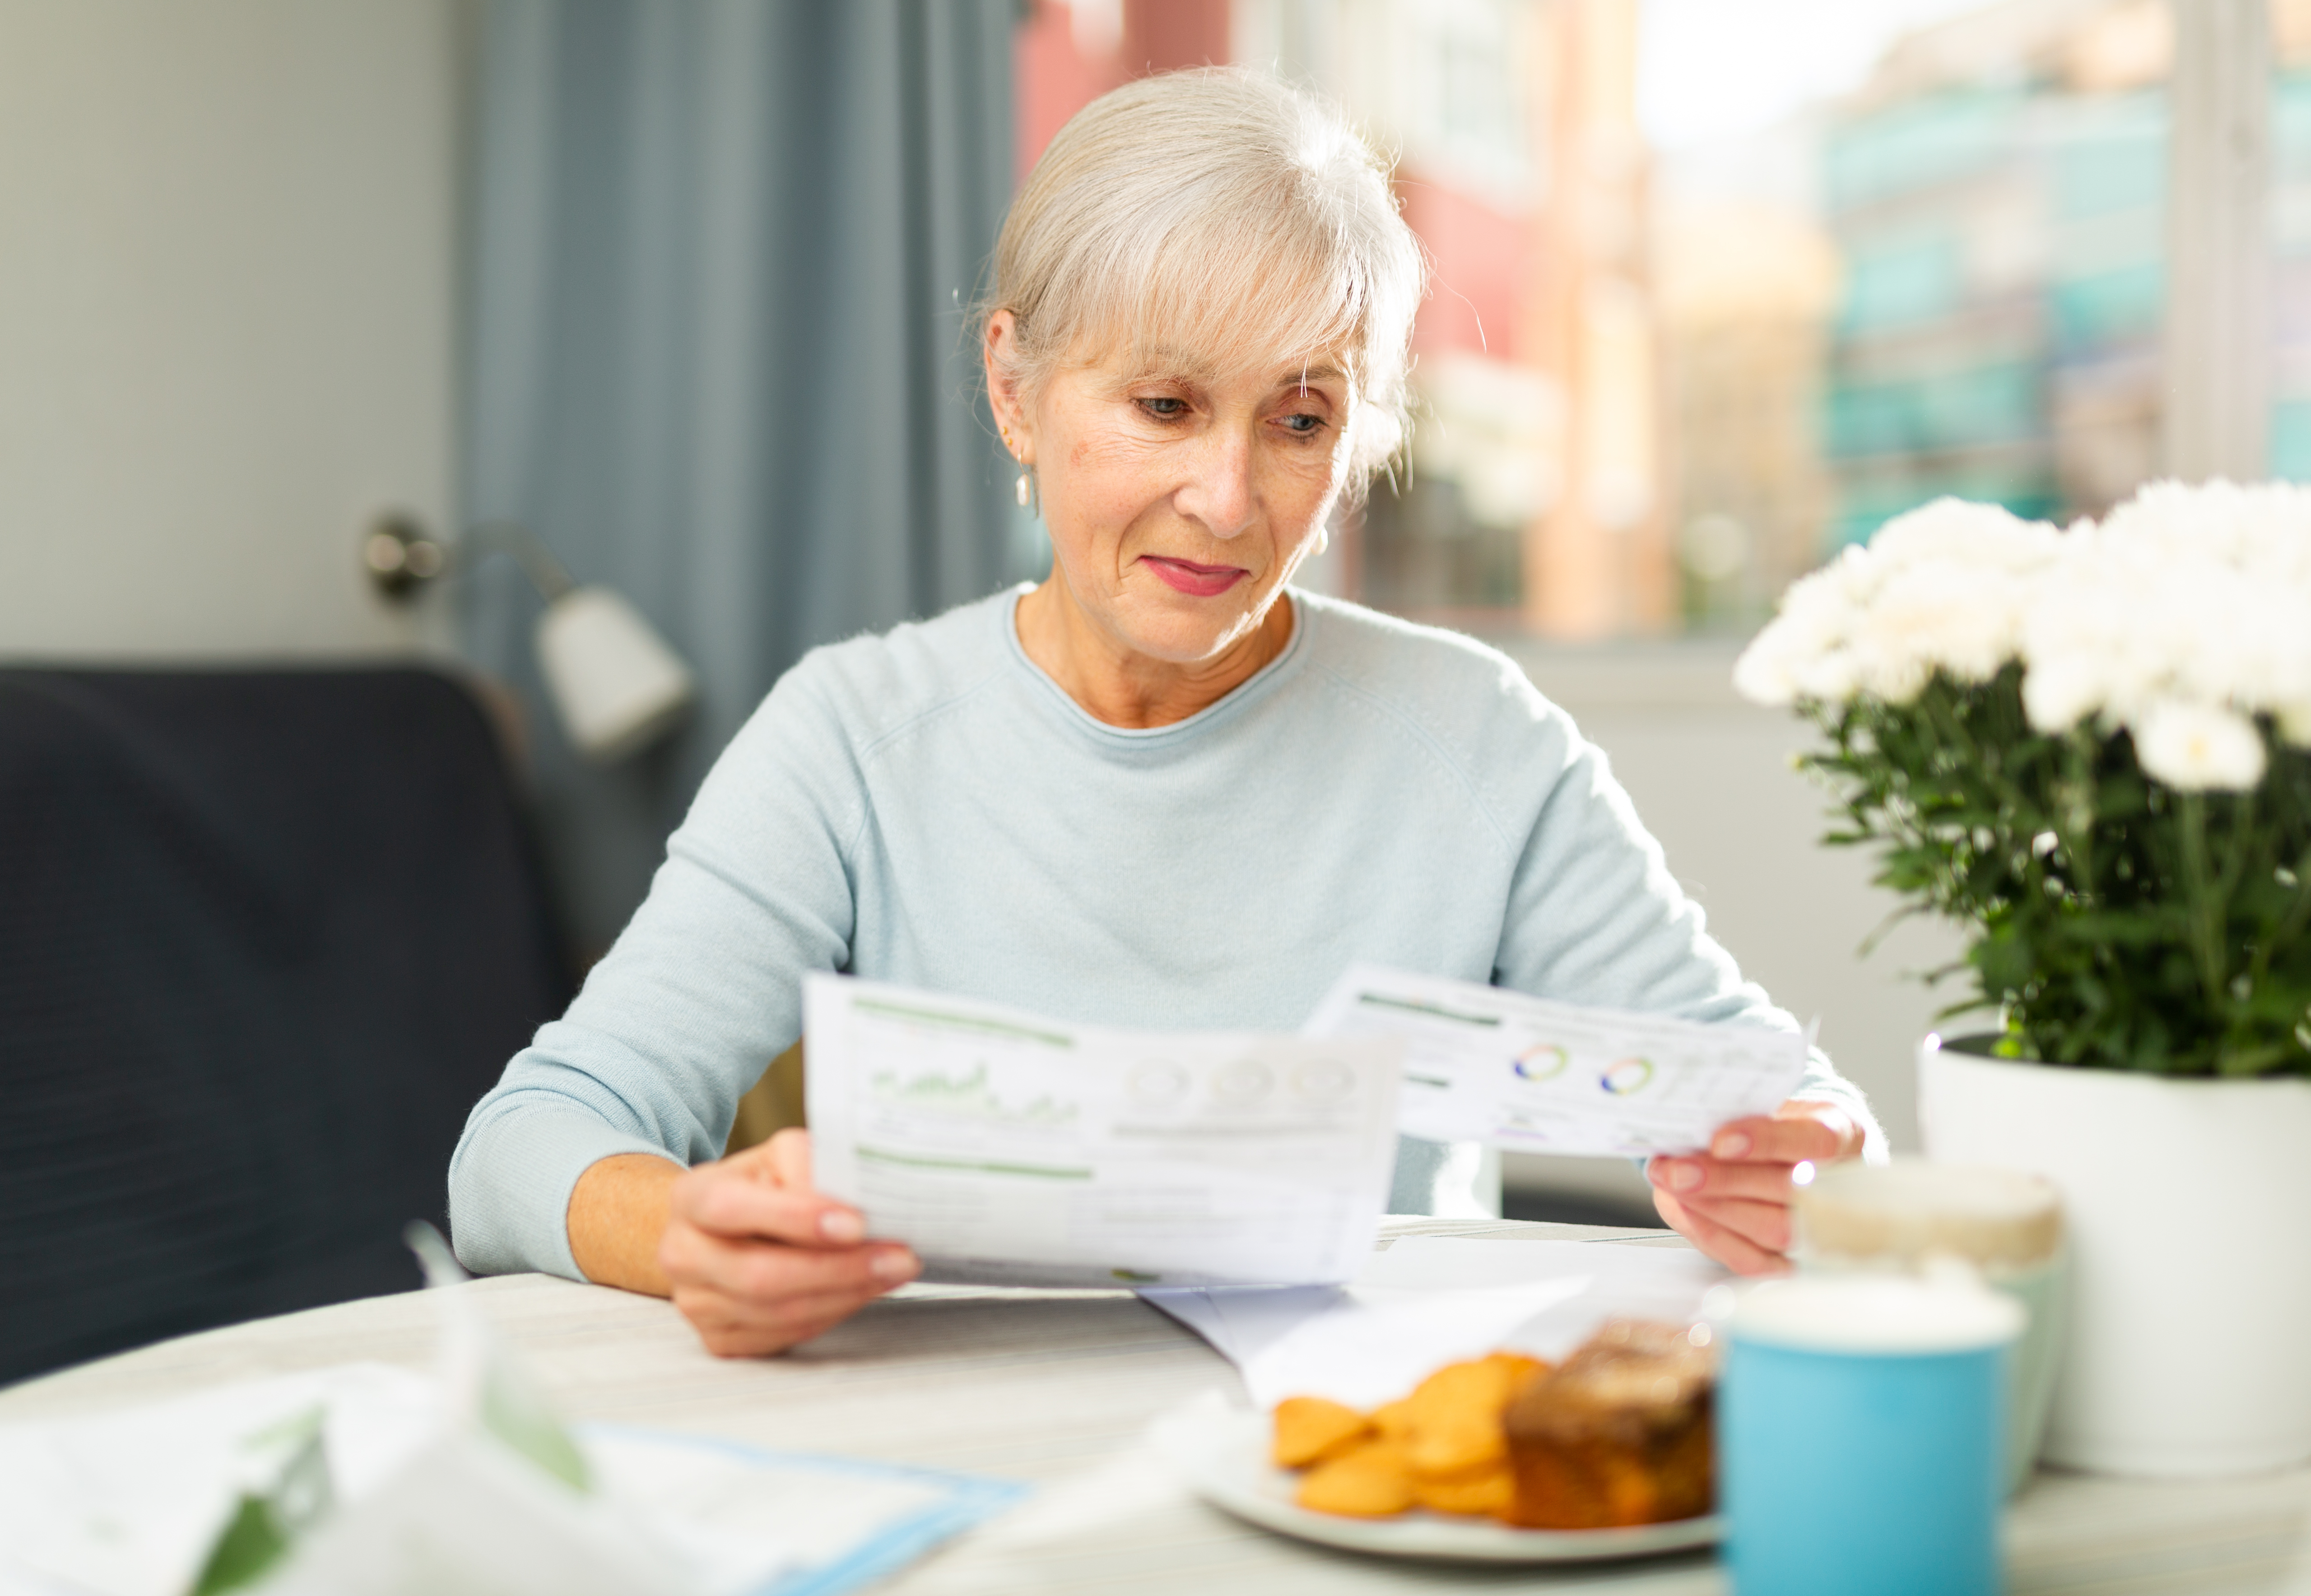 Senior woman reading papers with interest at home table